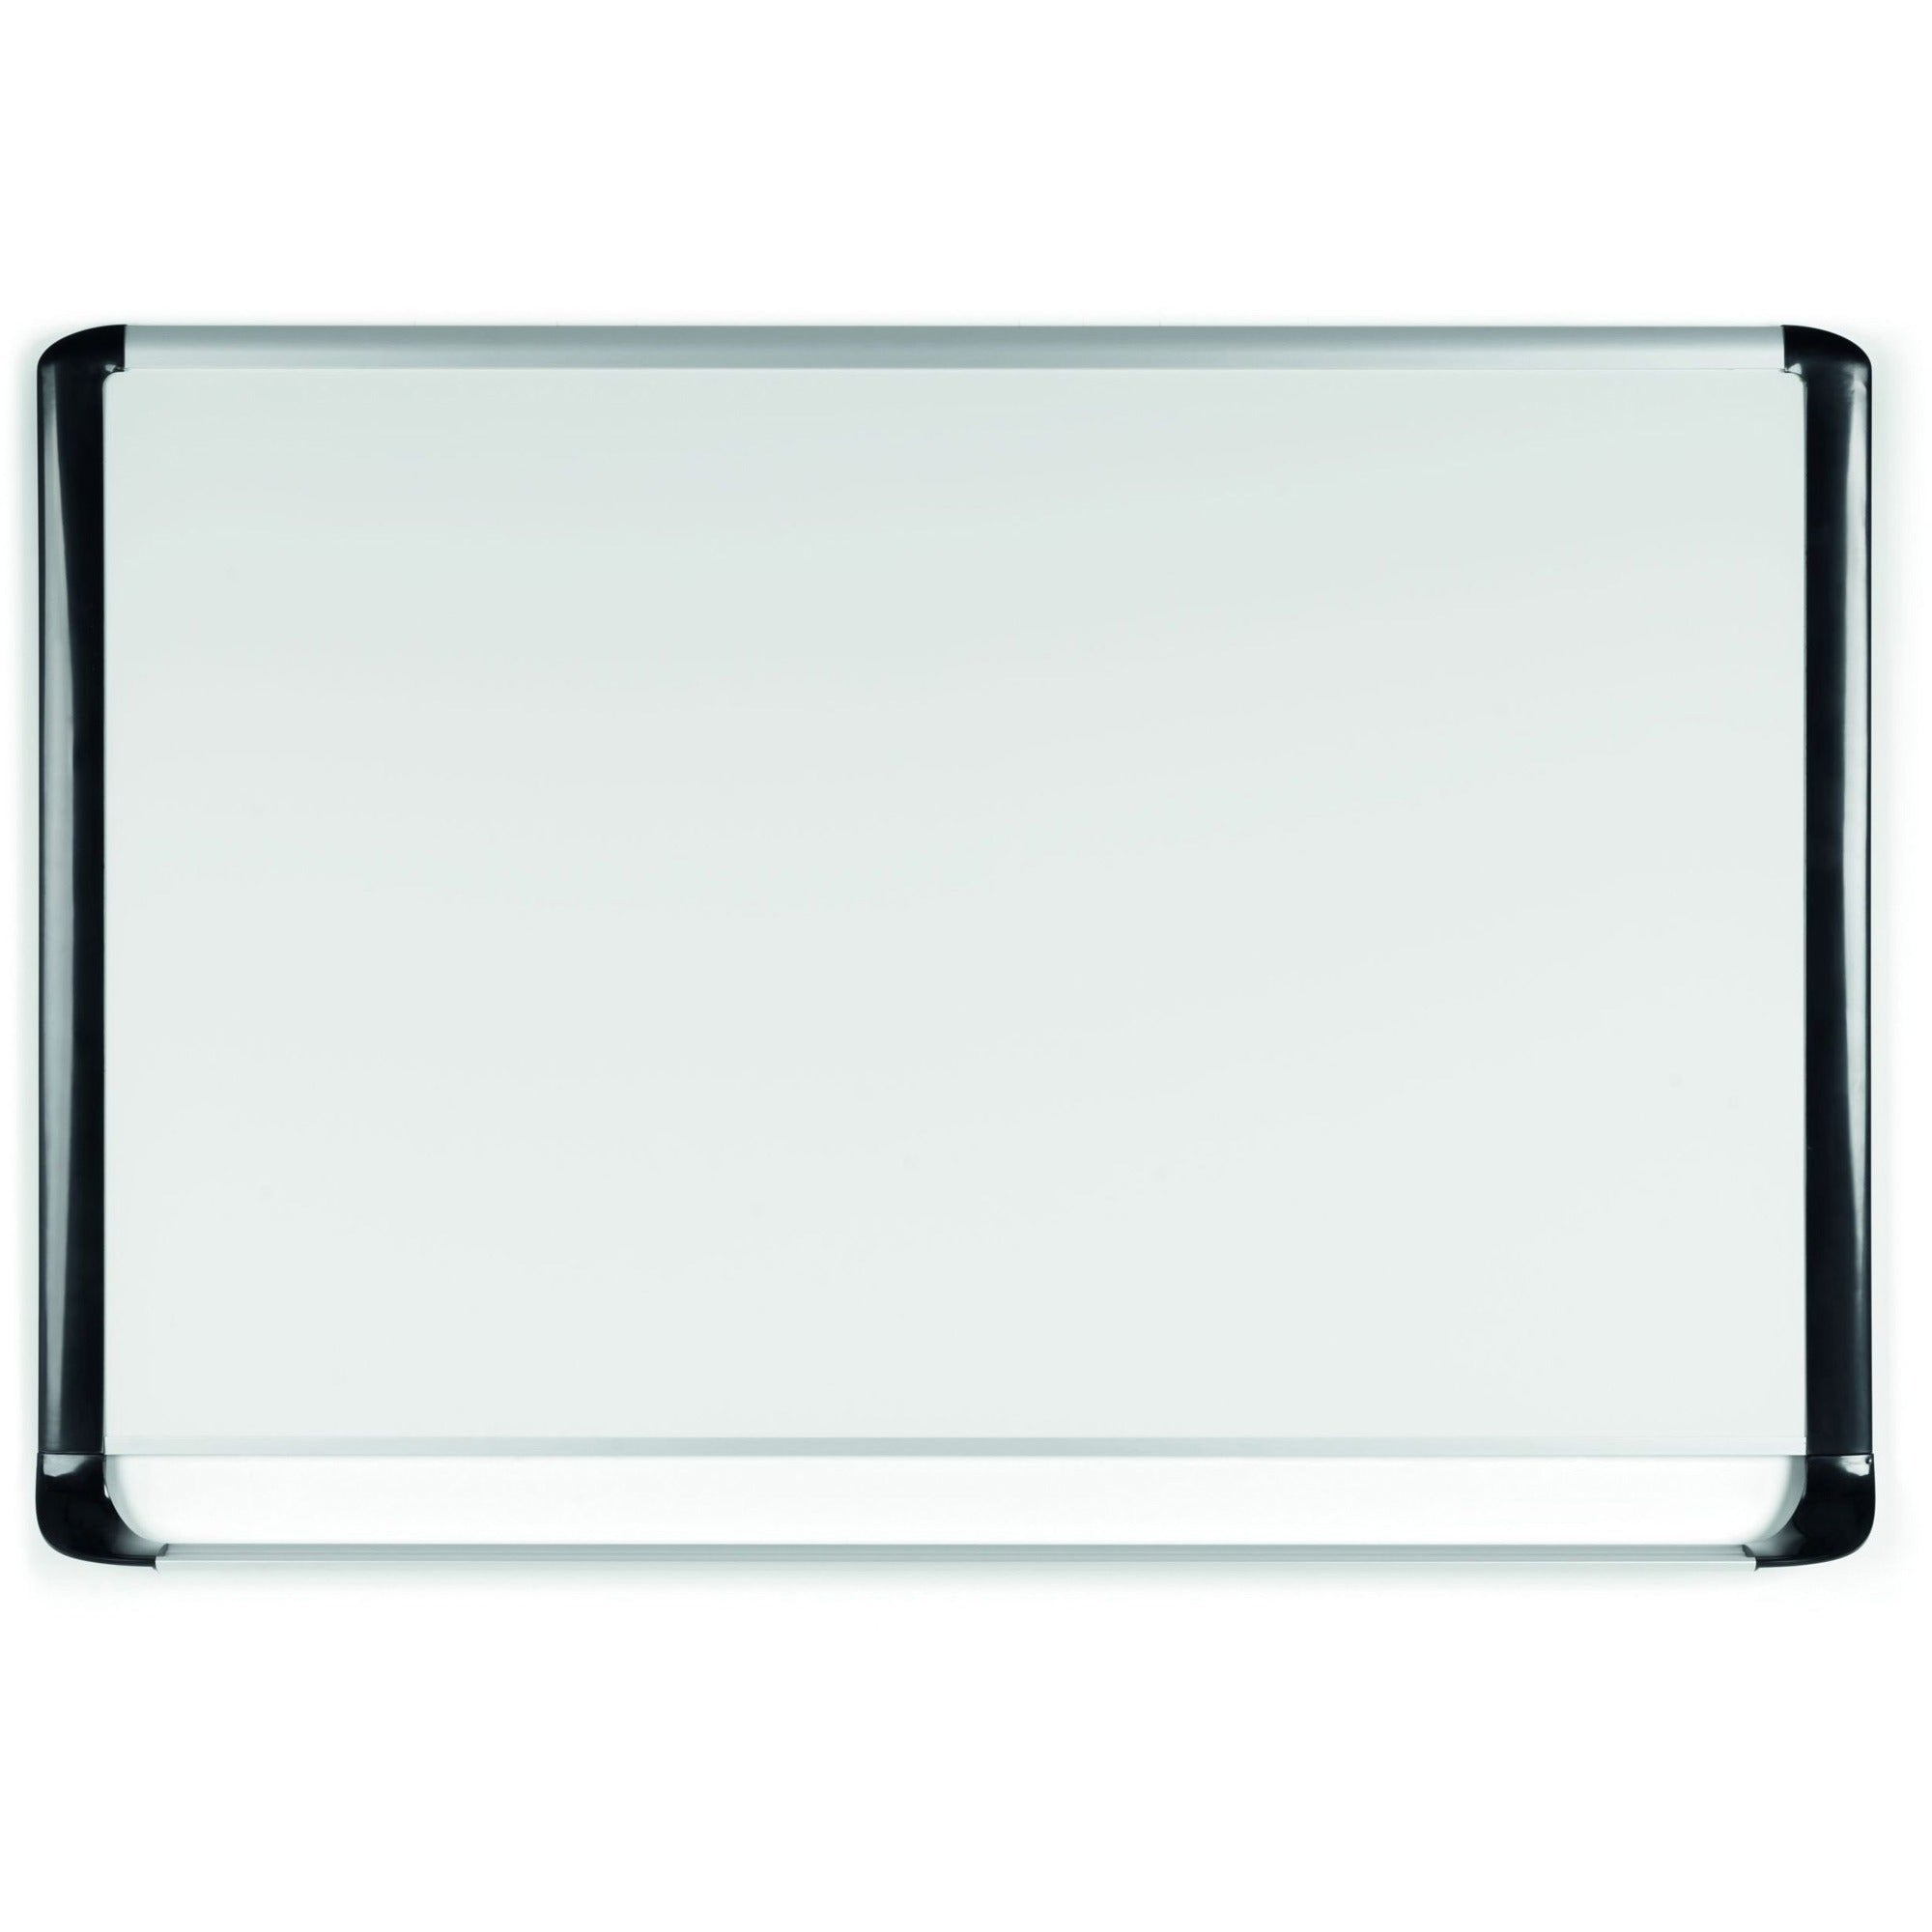 MasterVision MVI Platinum Plus Dry-erase Board - 36" (3 ft) Width x 24" (2 ft) Height - White Porcelain Surface - Silver/Black Aluminum/Plastic Frame - Rectangle - Magnetic - Scratch Resistant, Ghost Resistant, Marker Tray, Sturdy - Assembly Required - 